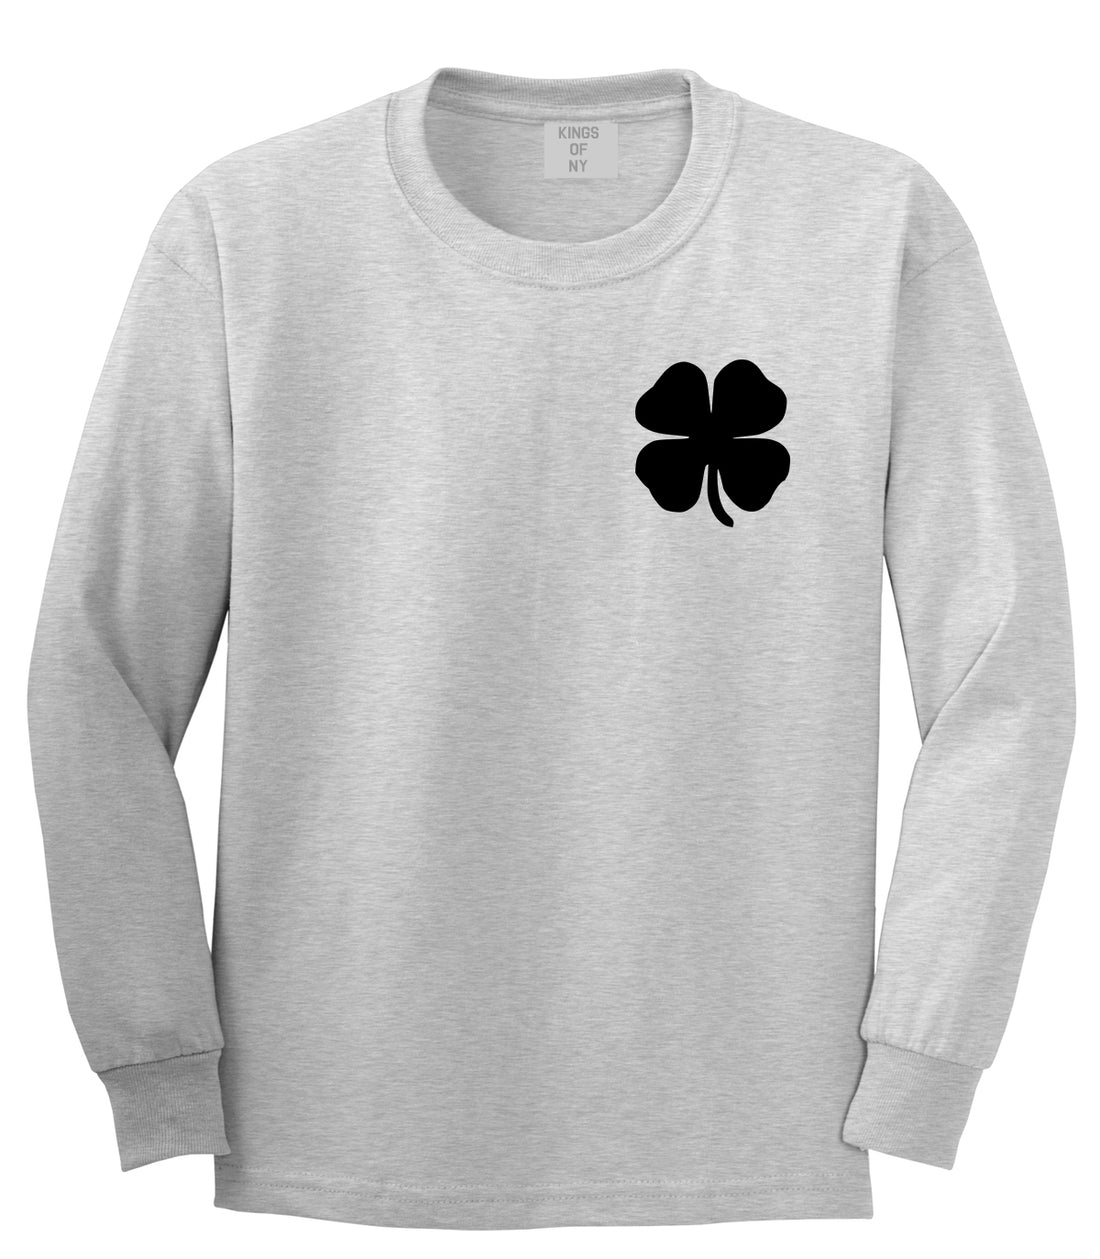 Four Leaf Clover Chest Grey Long Sleeve T-Shirt by Kings Of NY